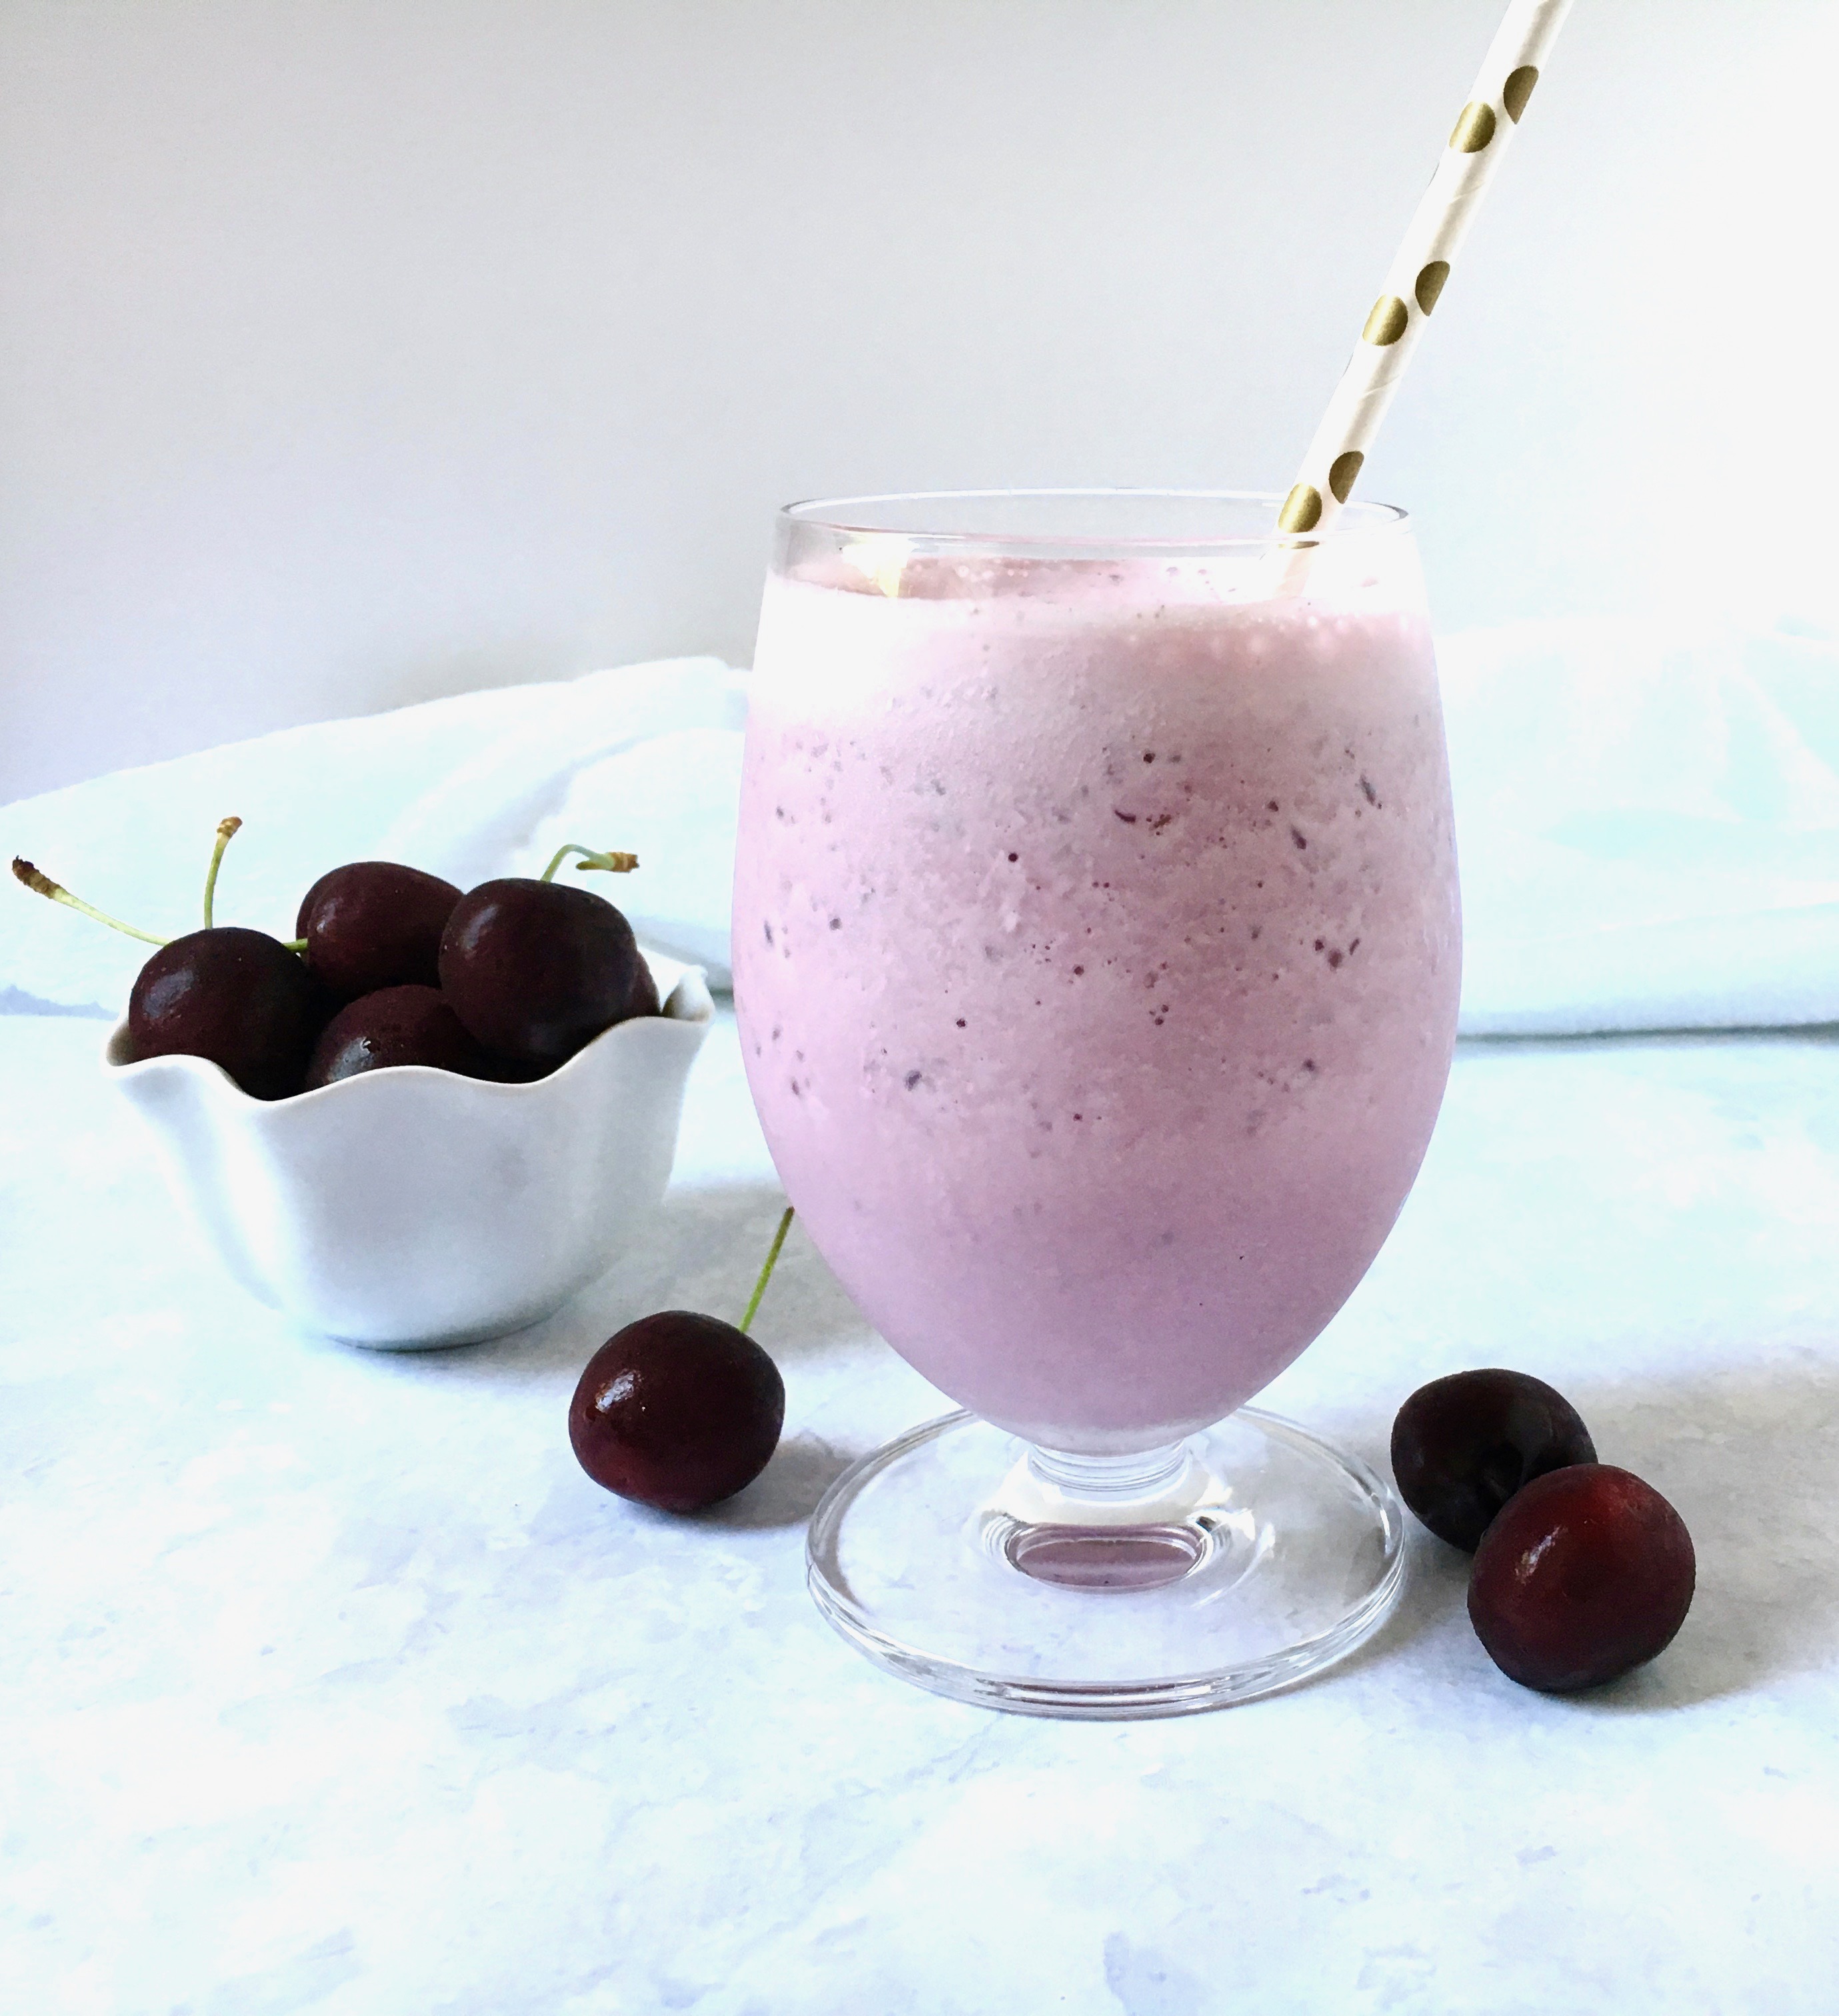 Are you a smoothie lover? Are you a smoothie lover? Then you must